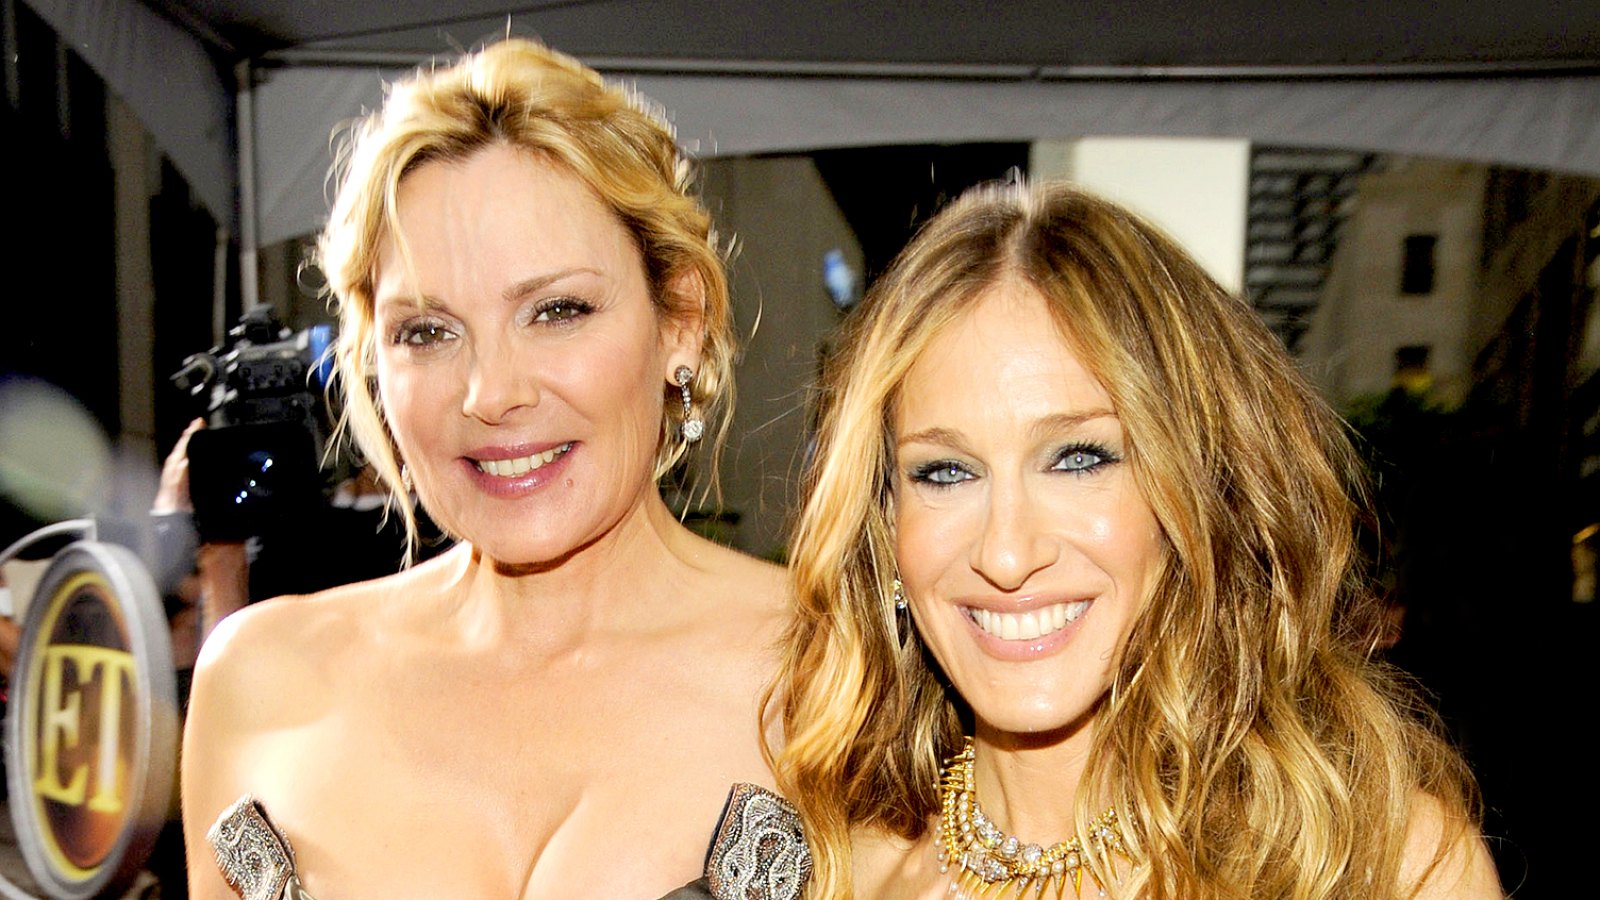 Kim Cattrall and Sarah Jessica Parker attend 2008 premiere of "Sex and the City: The Movie" at Radio City Music Hall in New York City.